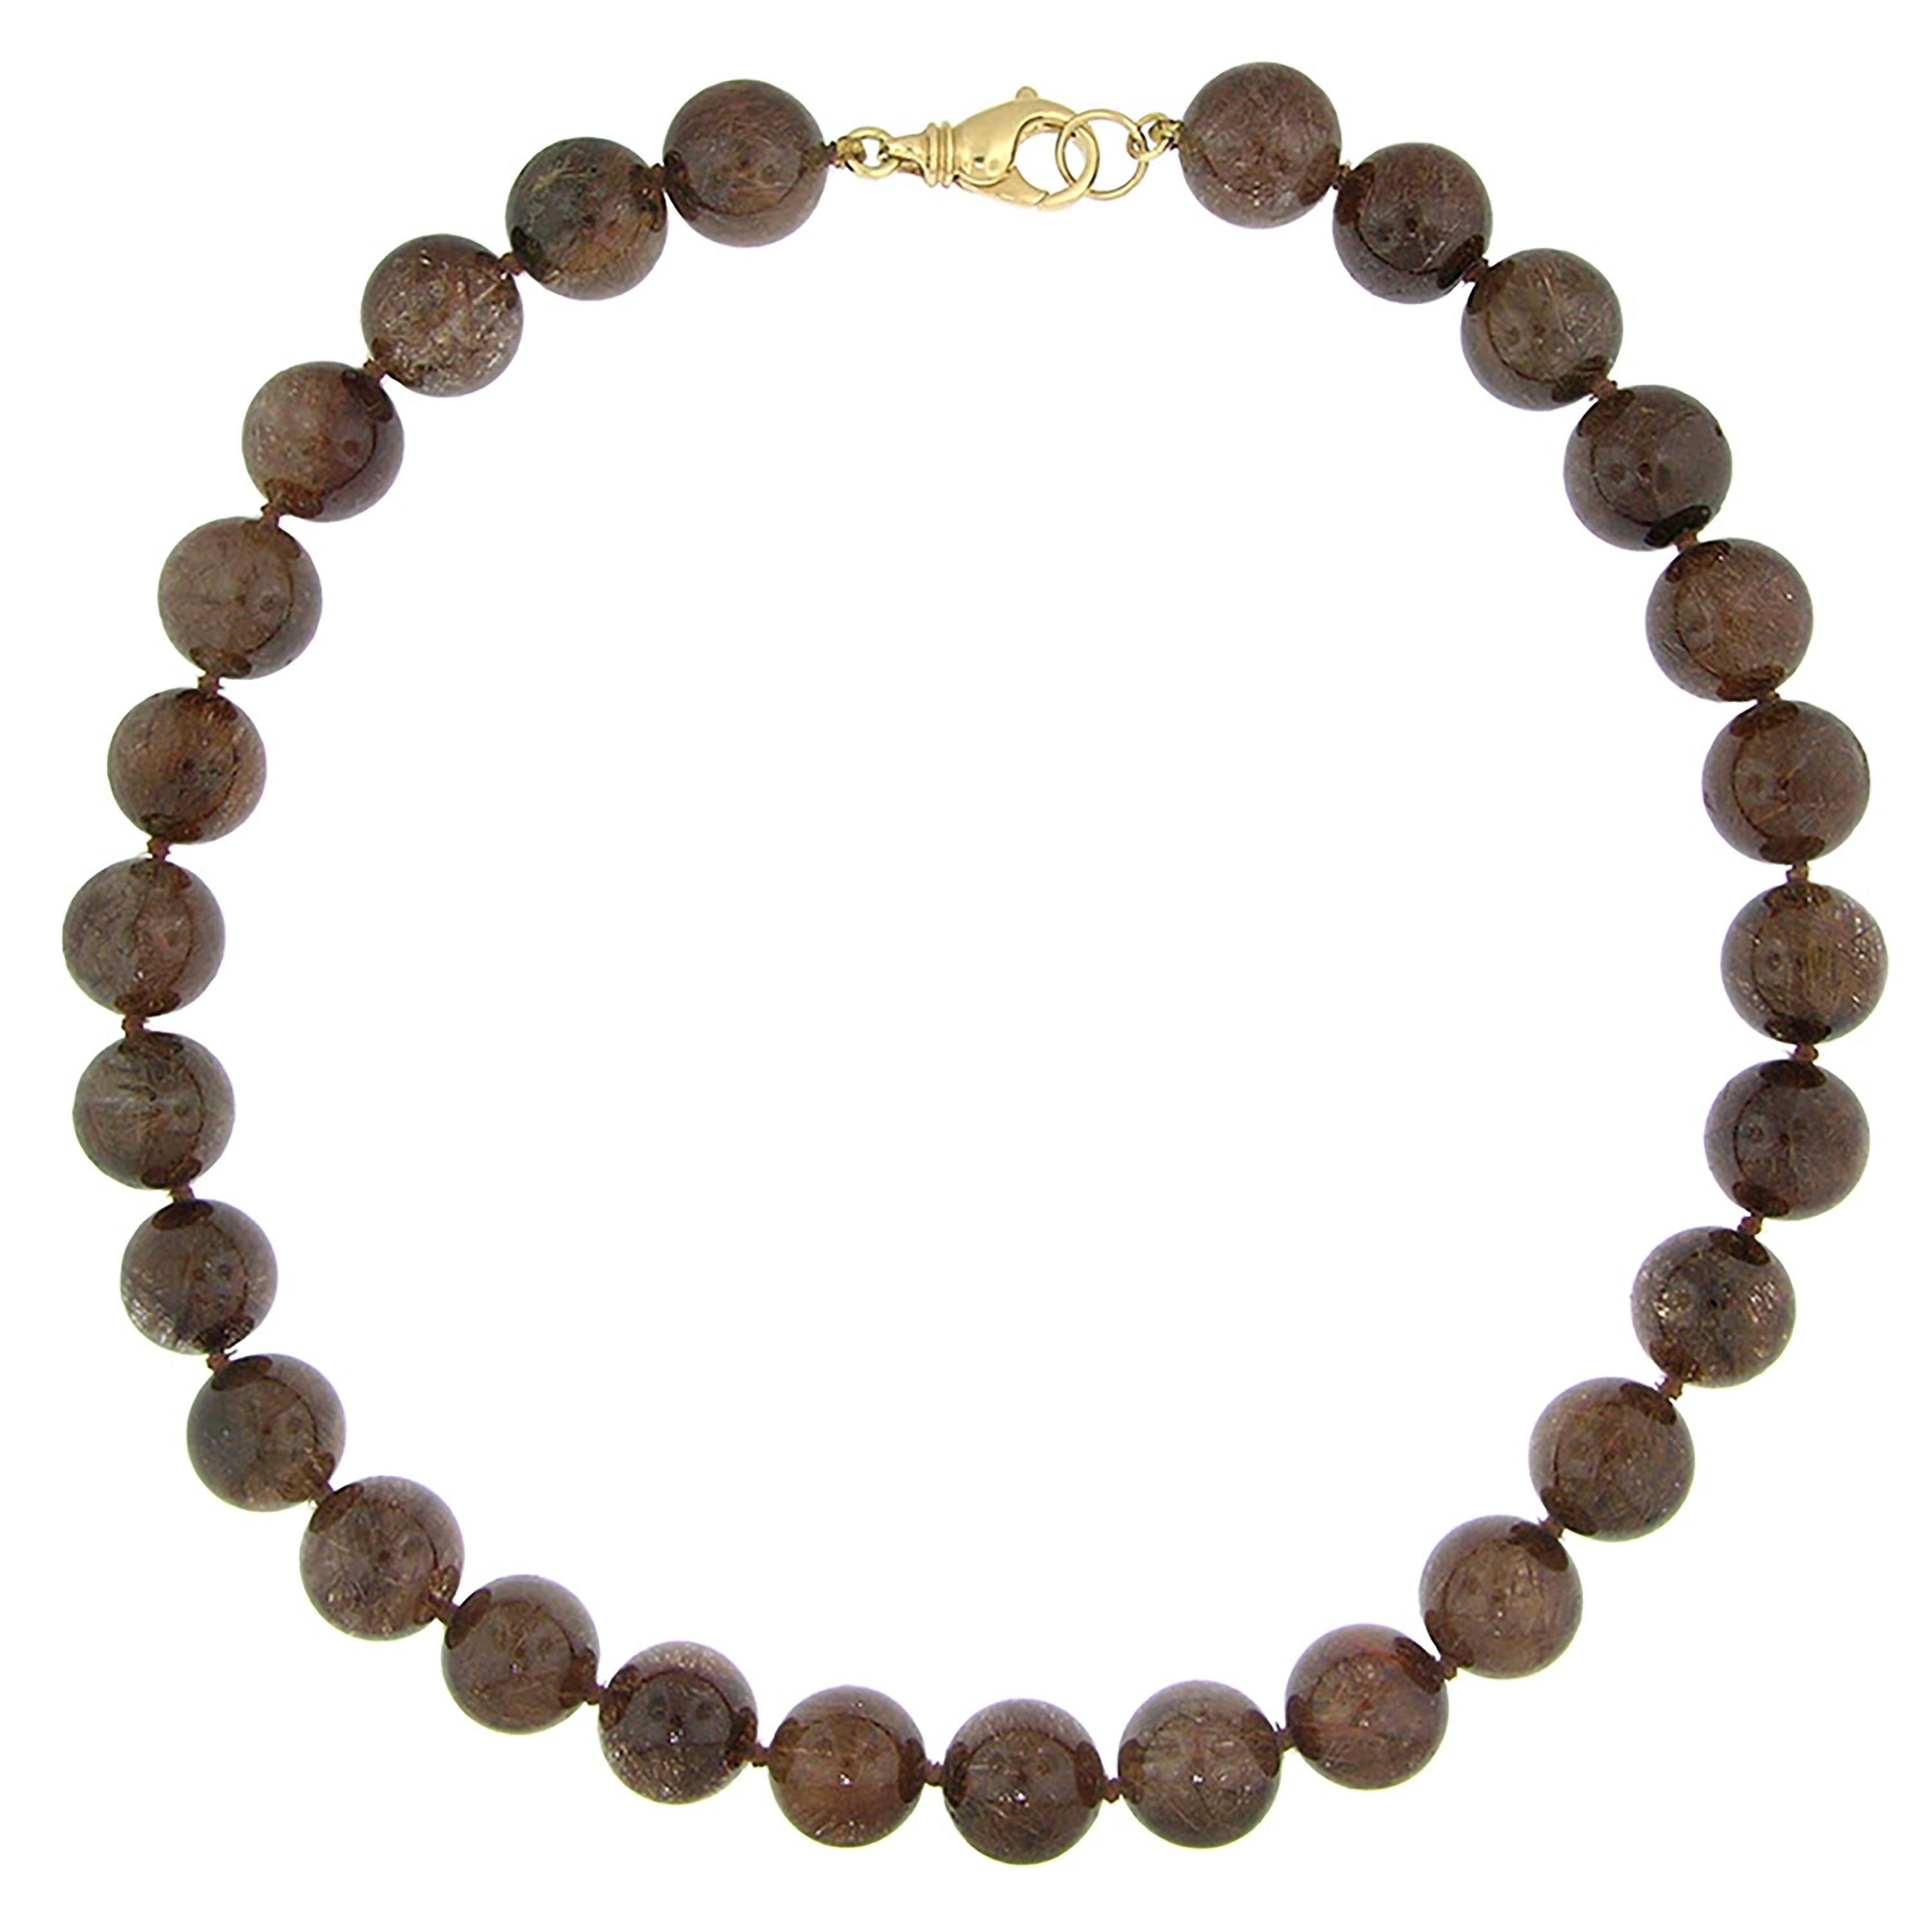 This gemstone beaded necklace showcases a luxurious rutillated quartz. This is a clear, colorless quartz with an extremely dense population of golden rutile needles. The richness of the look will elevate any outift.

This necklace is finished with